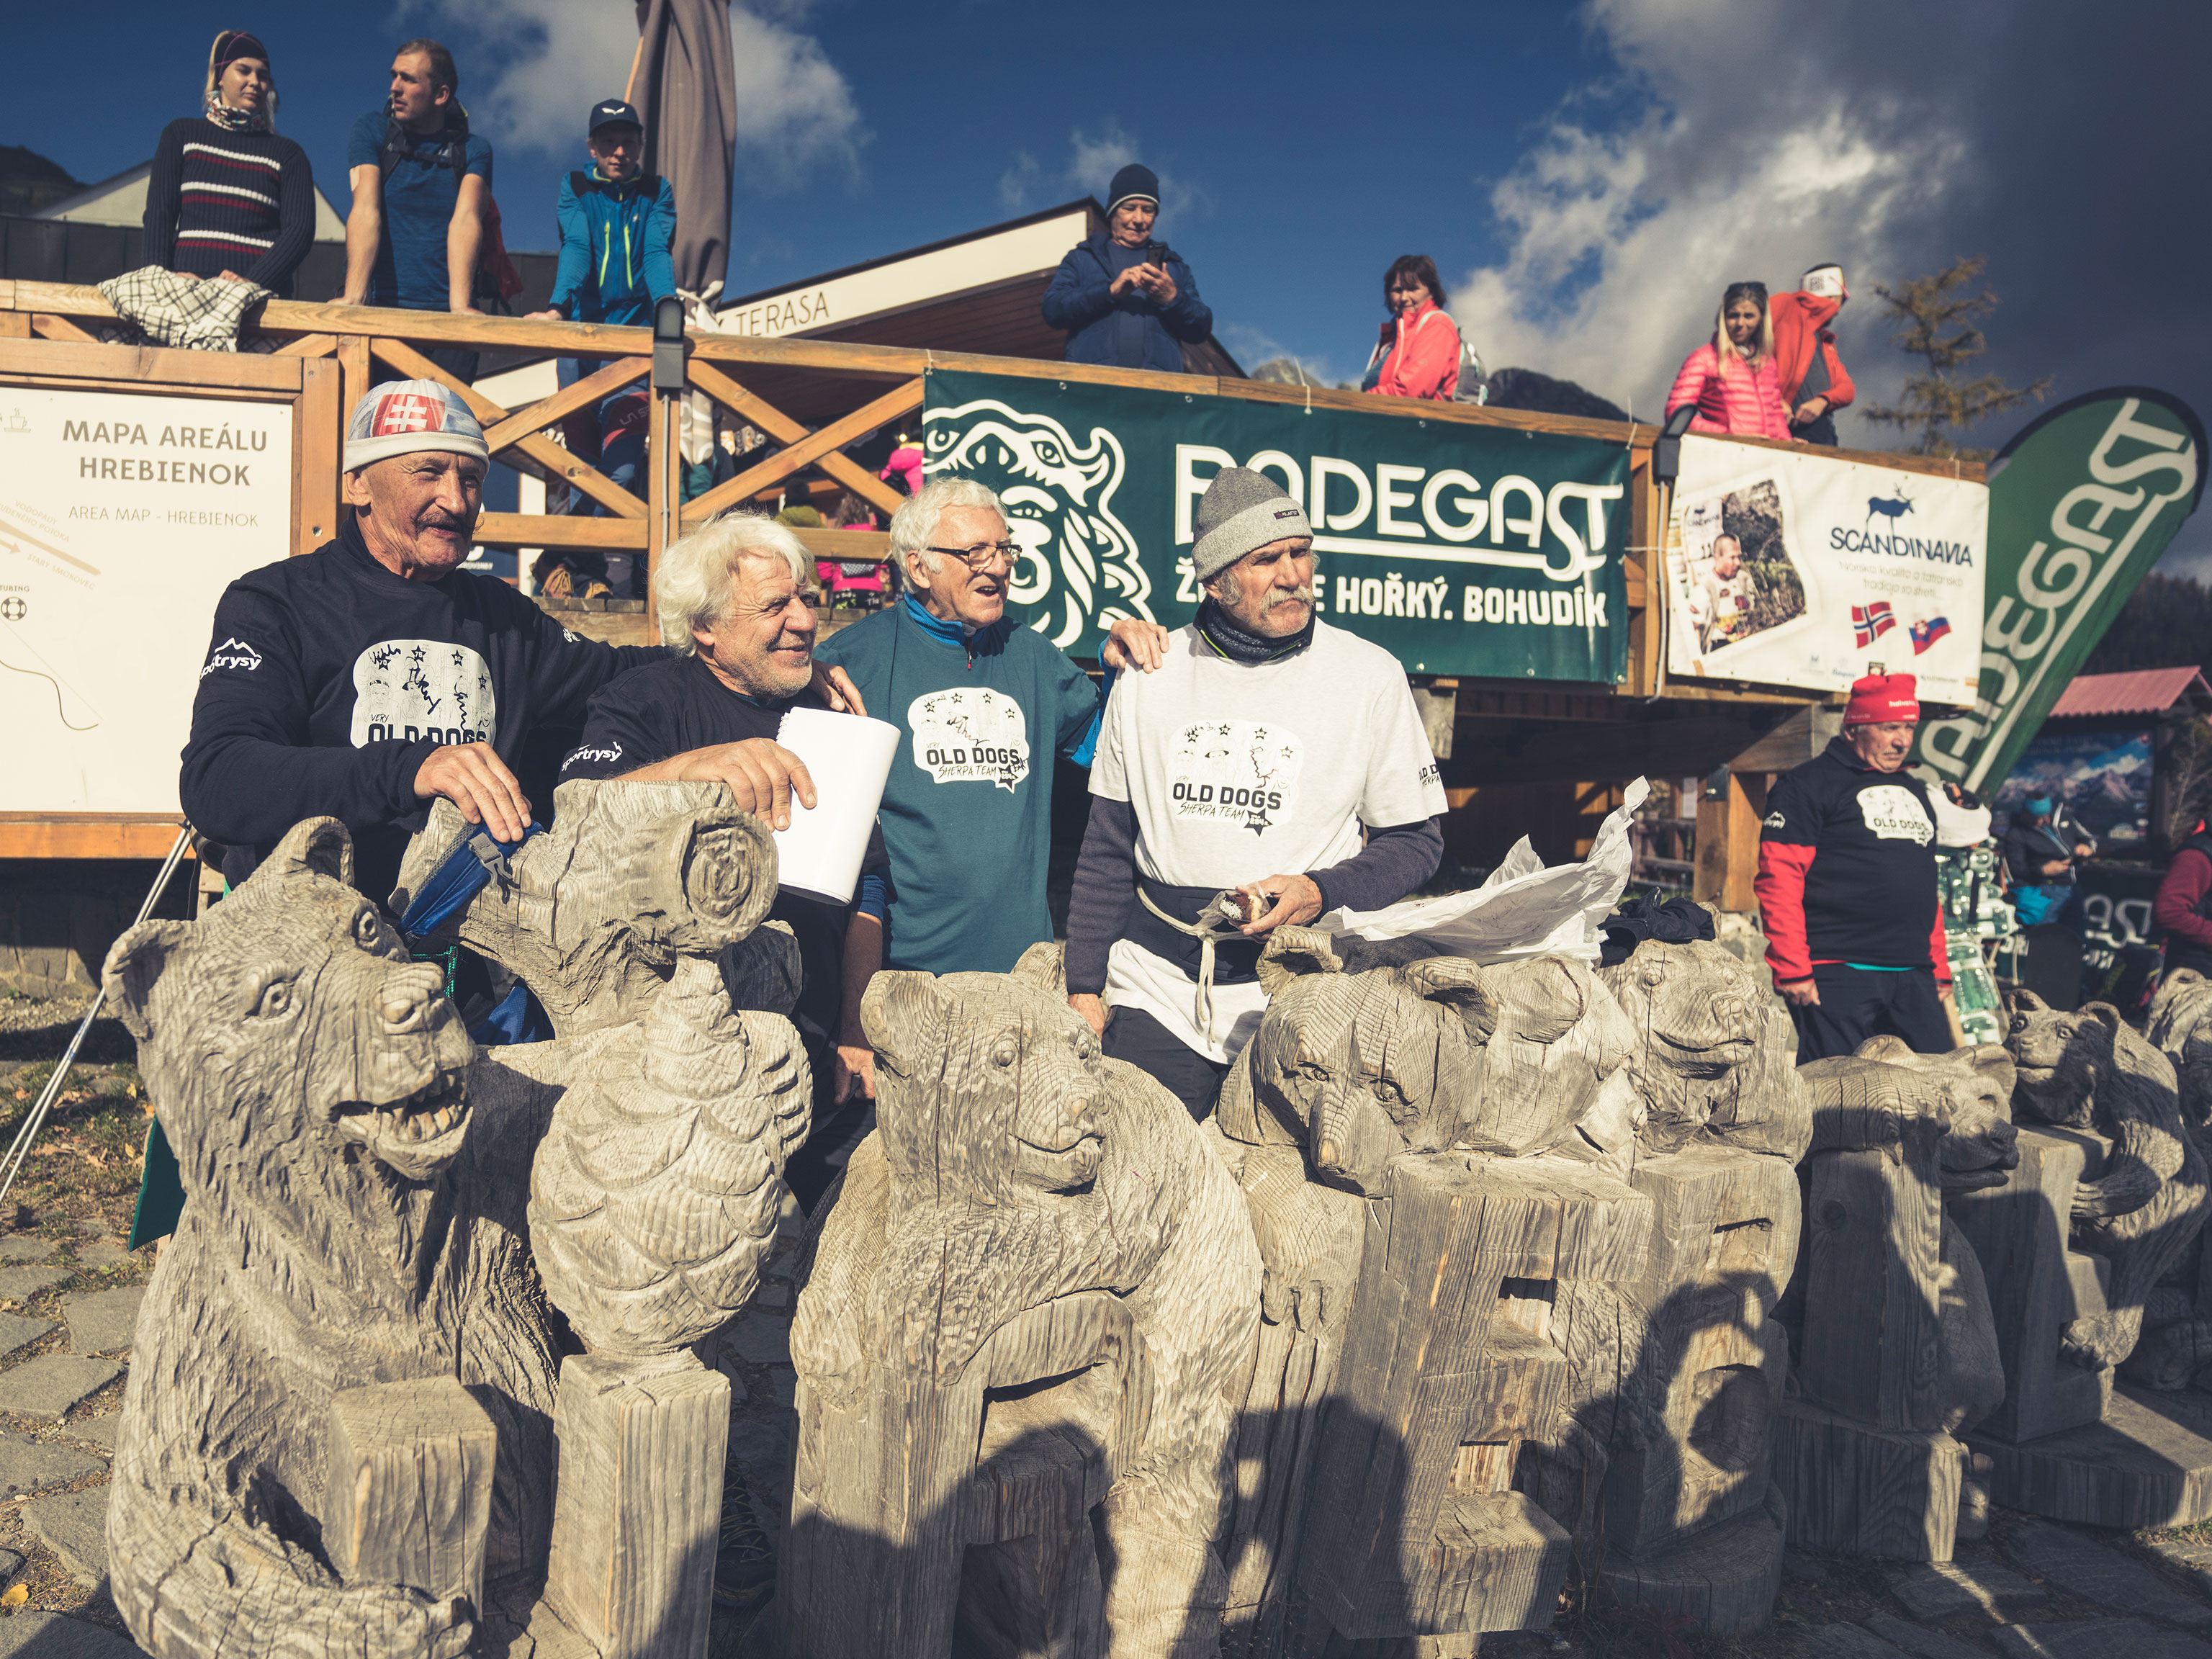 Four organisers of the Tatra Sherpa Rally posing behind carved wooden sculptures